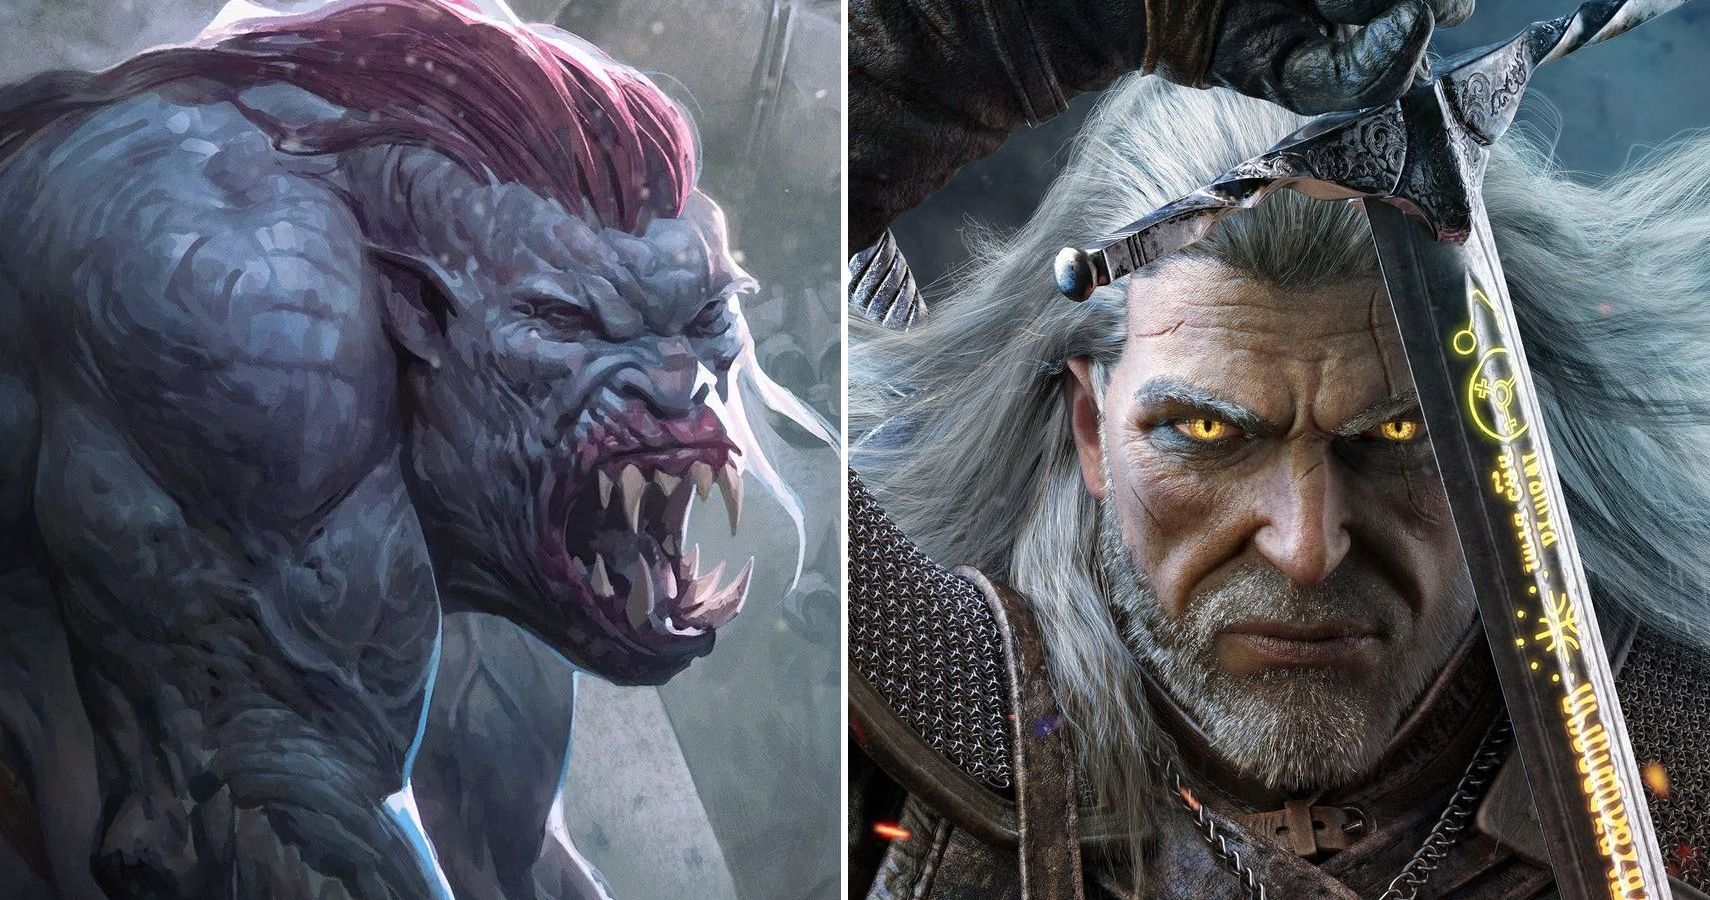 The Witcher' Season 3 has one of the most nightmare fuel monsters